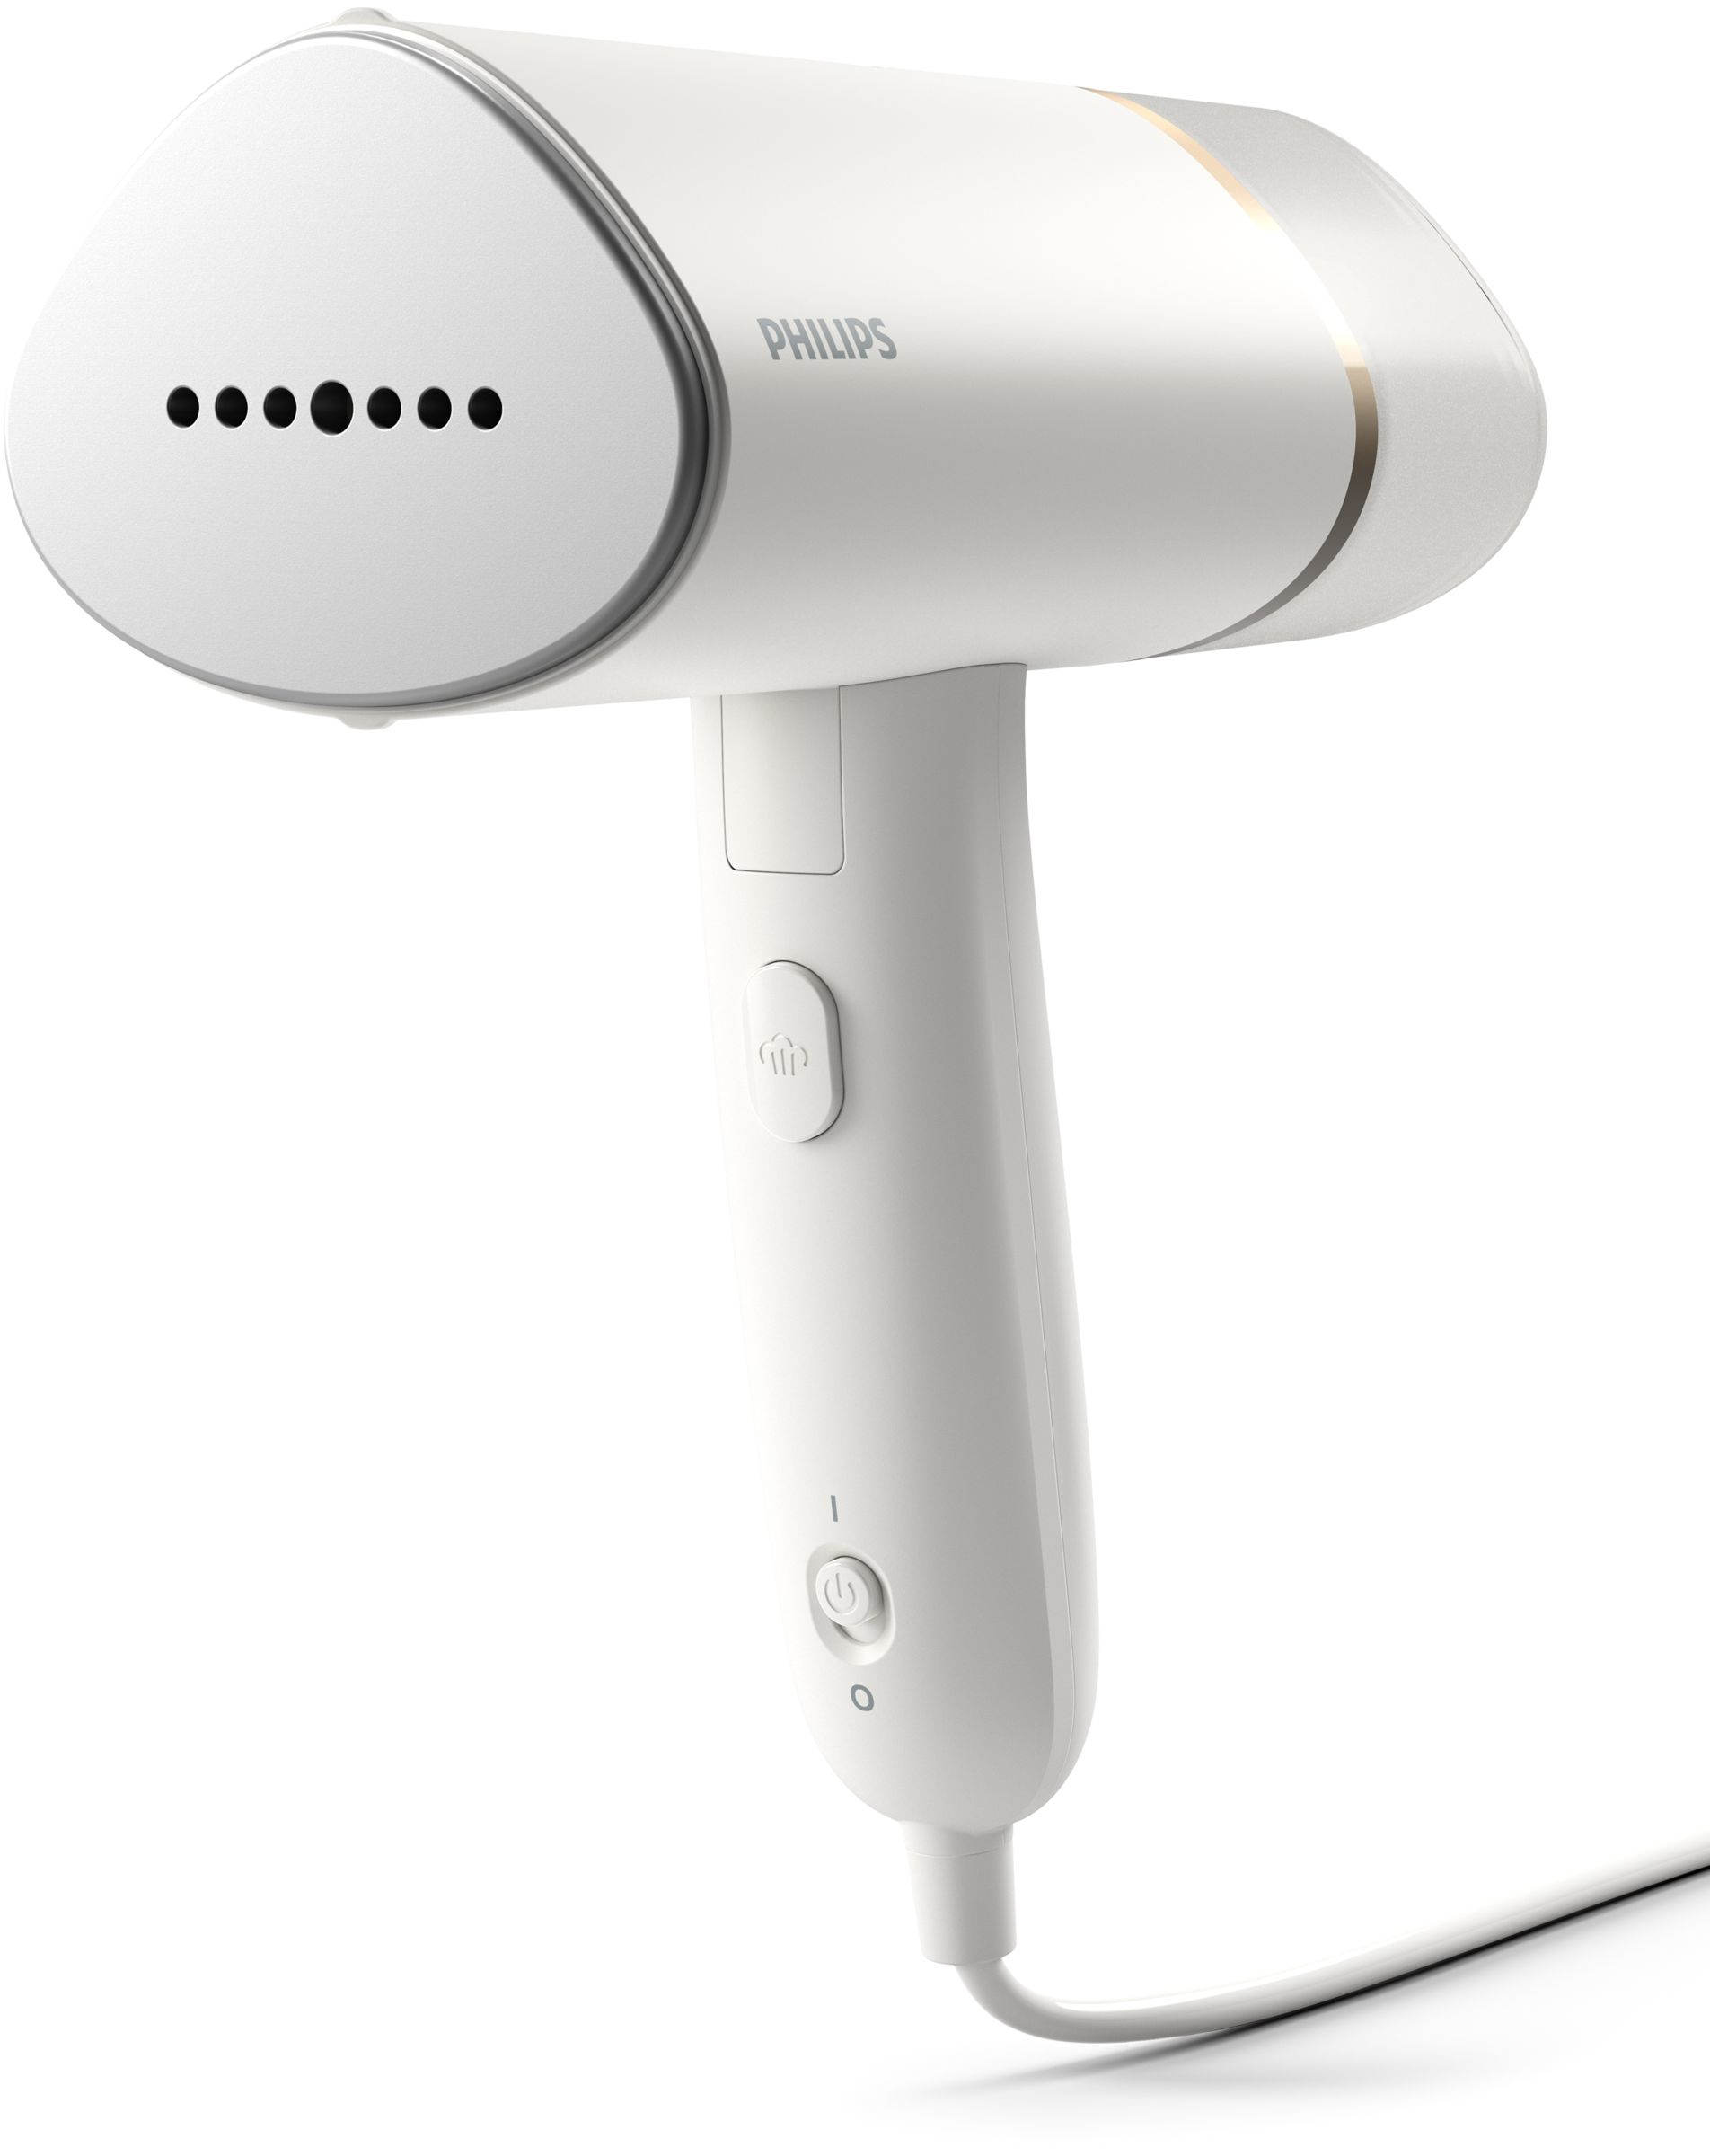 Philips 3000 series Compact and foldable Handheld Steamer